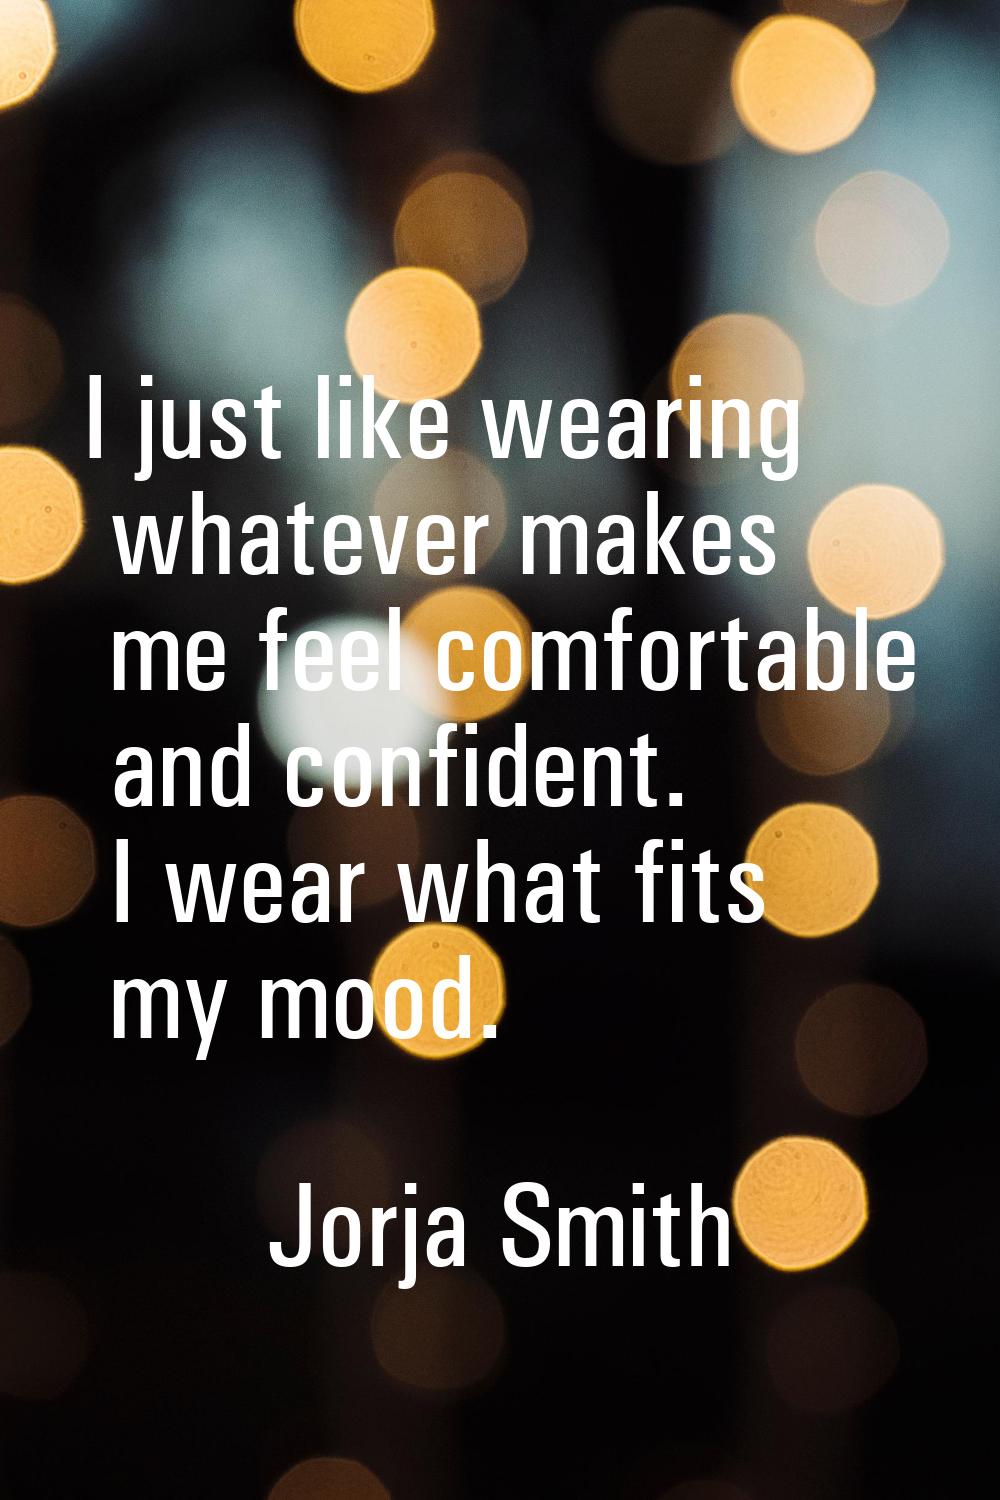 I just like wearing whatever makes me feel comfortable and confident. I wear what fits my mood.